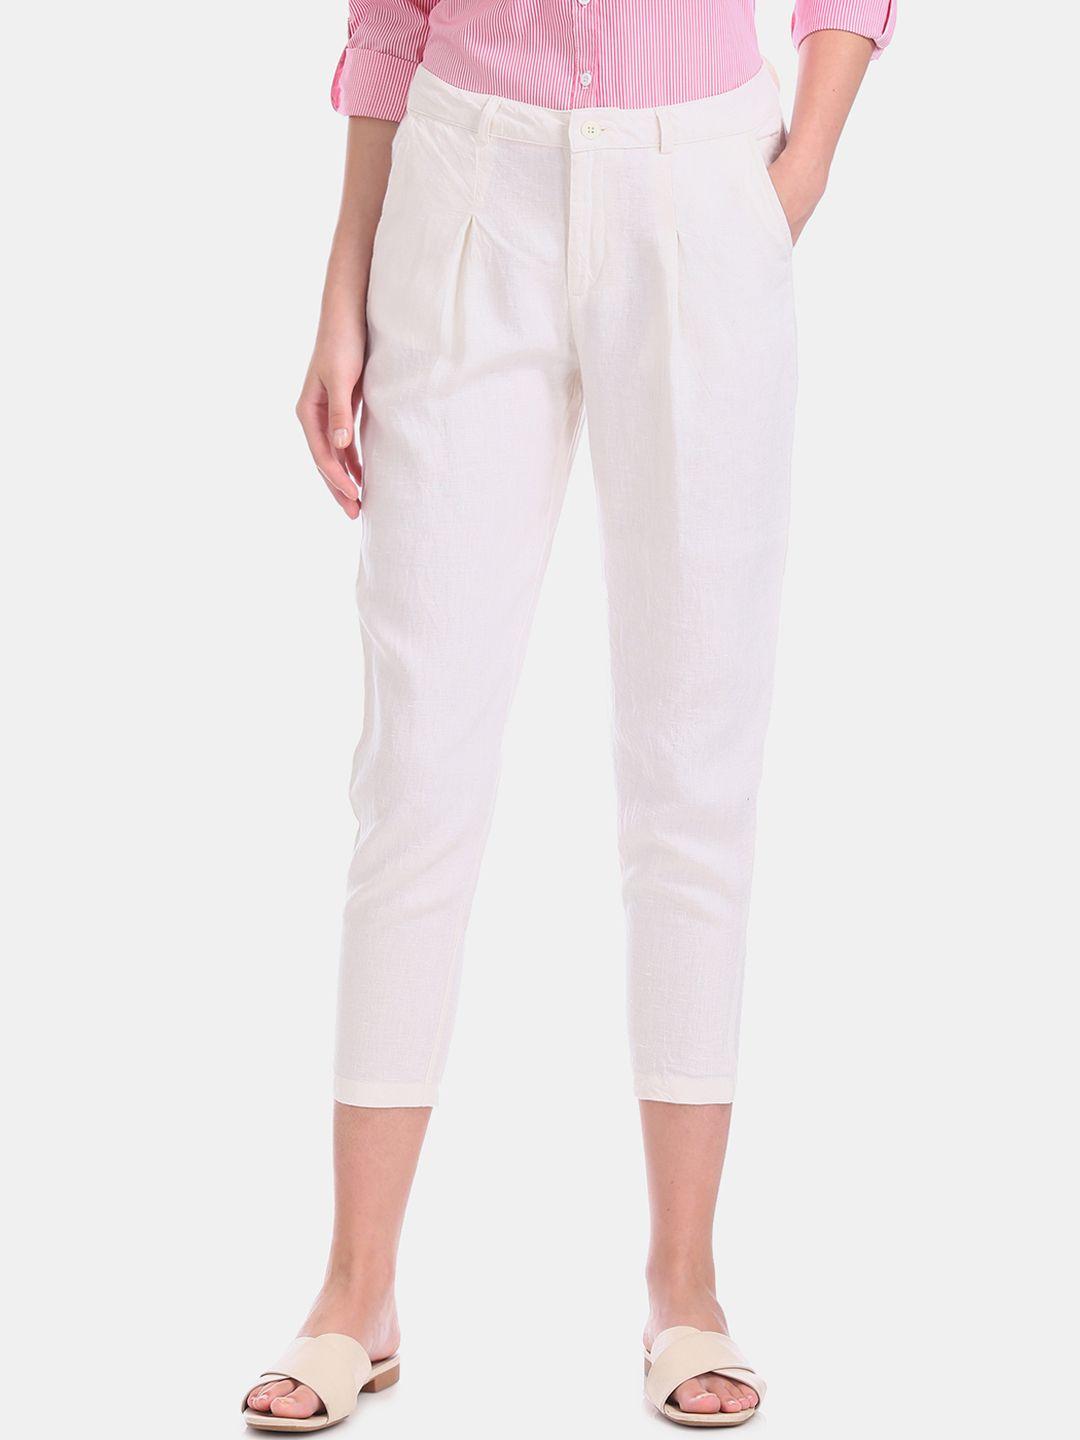 u.s. polo assn. women white straight fit solid three-fourth length peg linen trousers